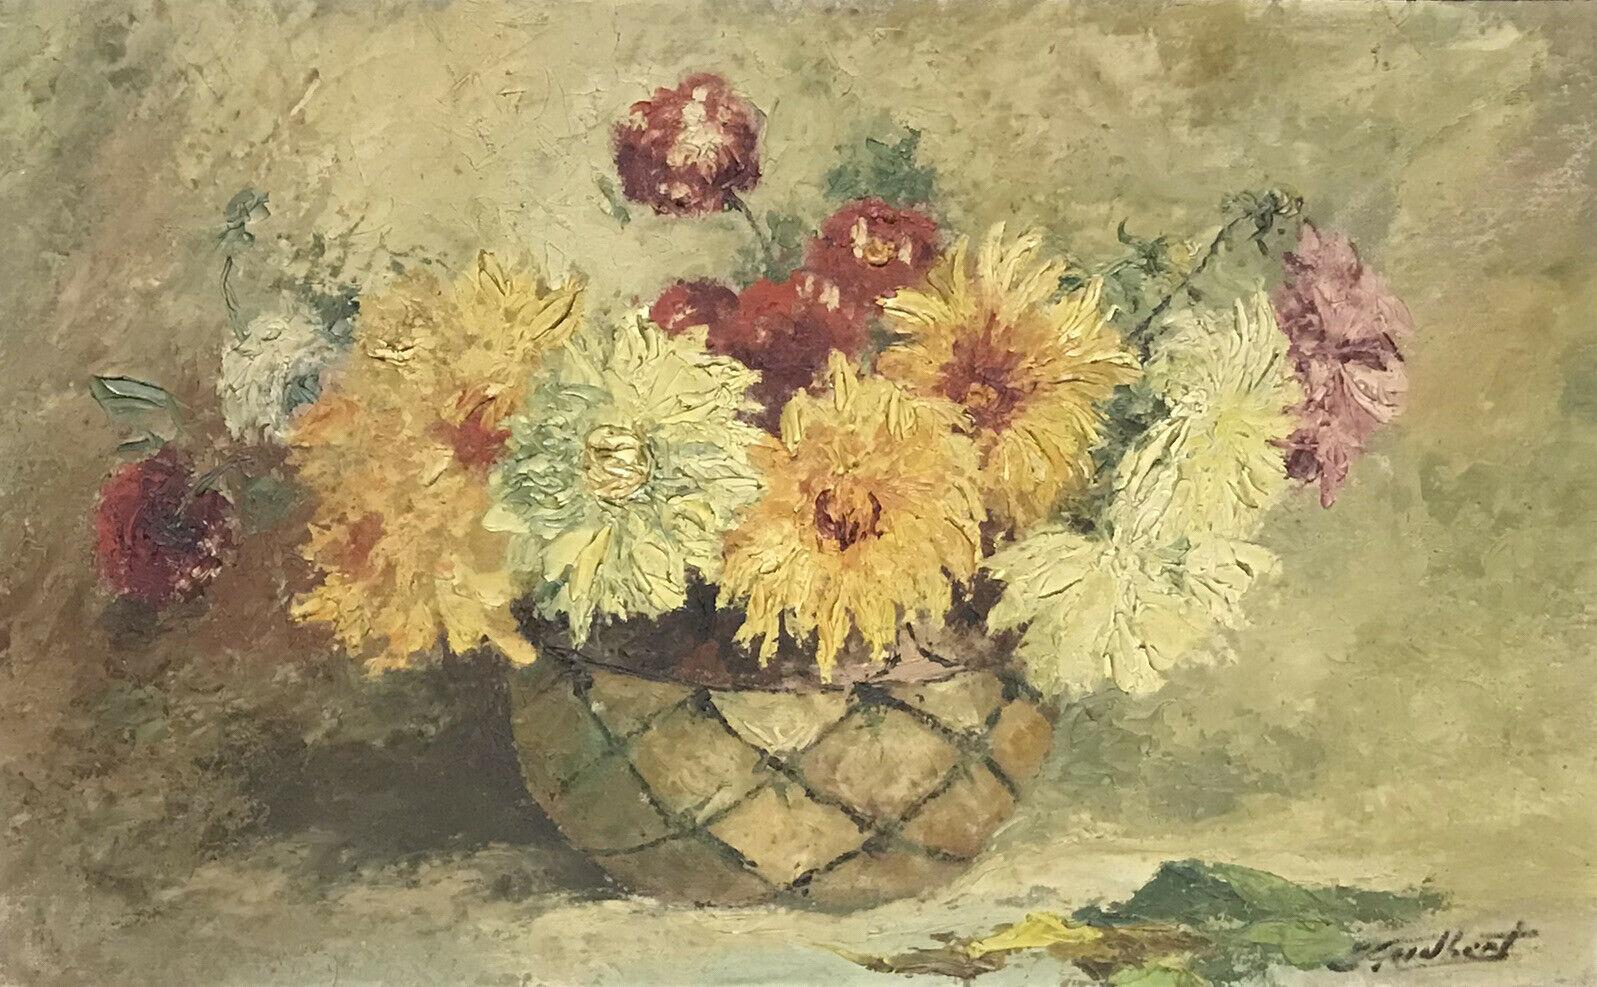 Unknown - LARGE 1940s FRENCH VINTAGE STILL LIFE OIL PAINTING - SHABBY CHIC  FLOWERS IN BOWL at 1stDibs